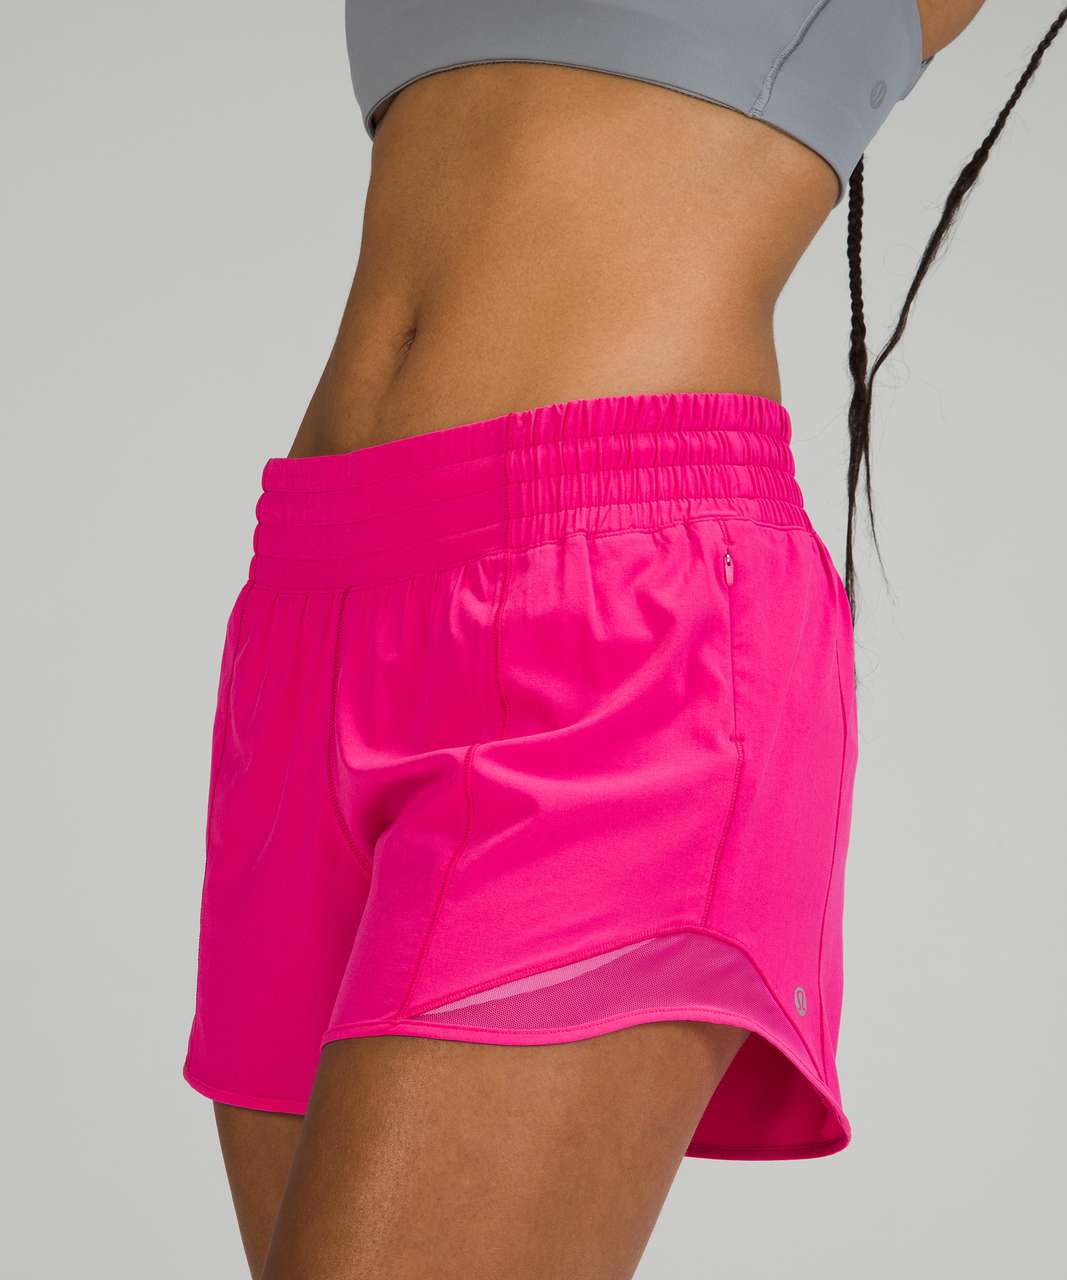 The cutest sonic pink  lululemon shorts for summer! 🔗 under “IN